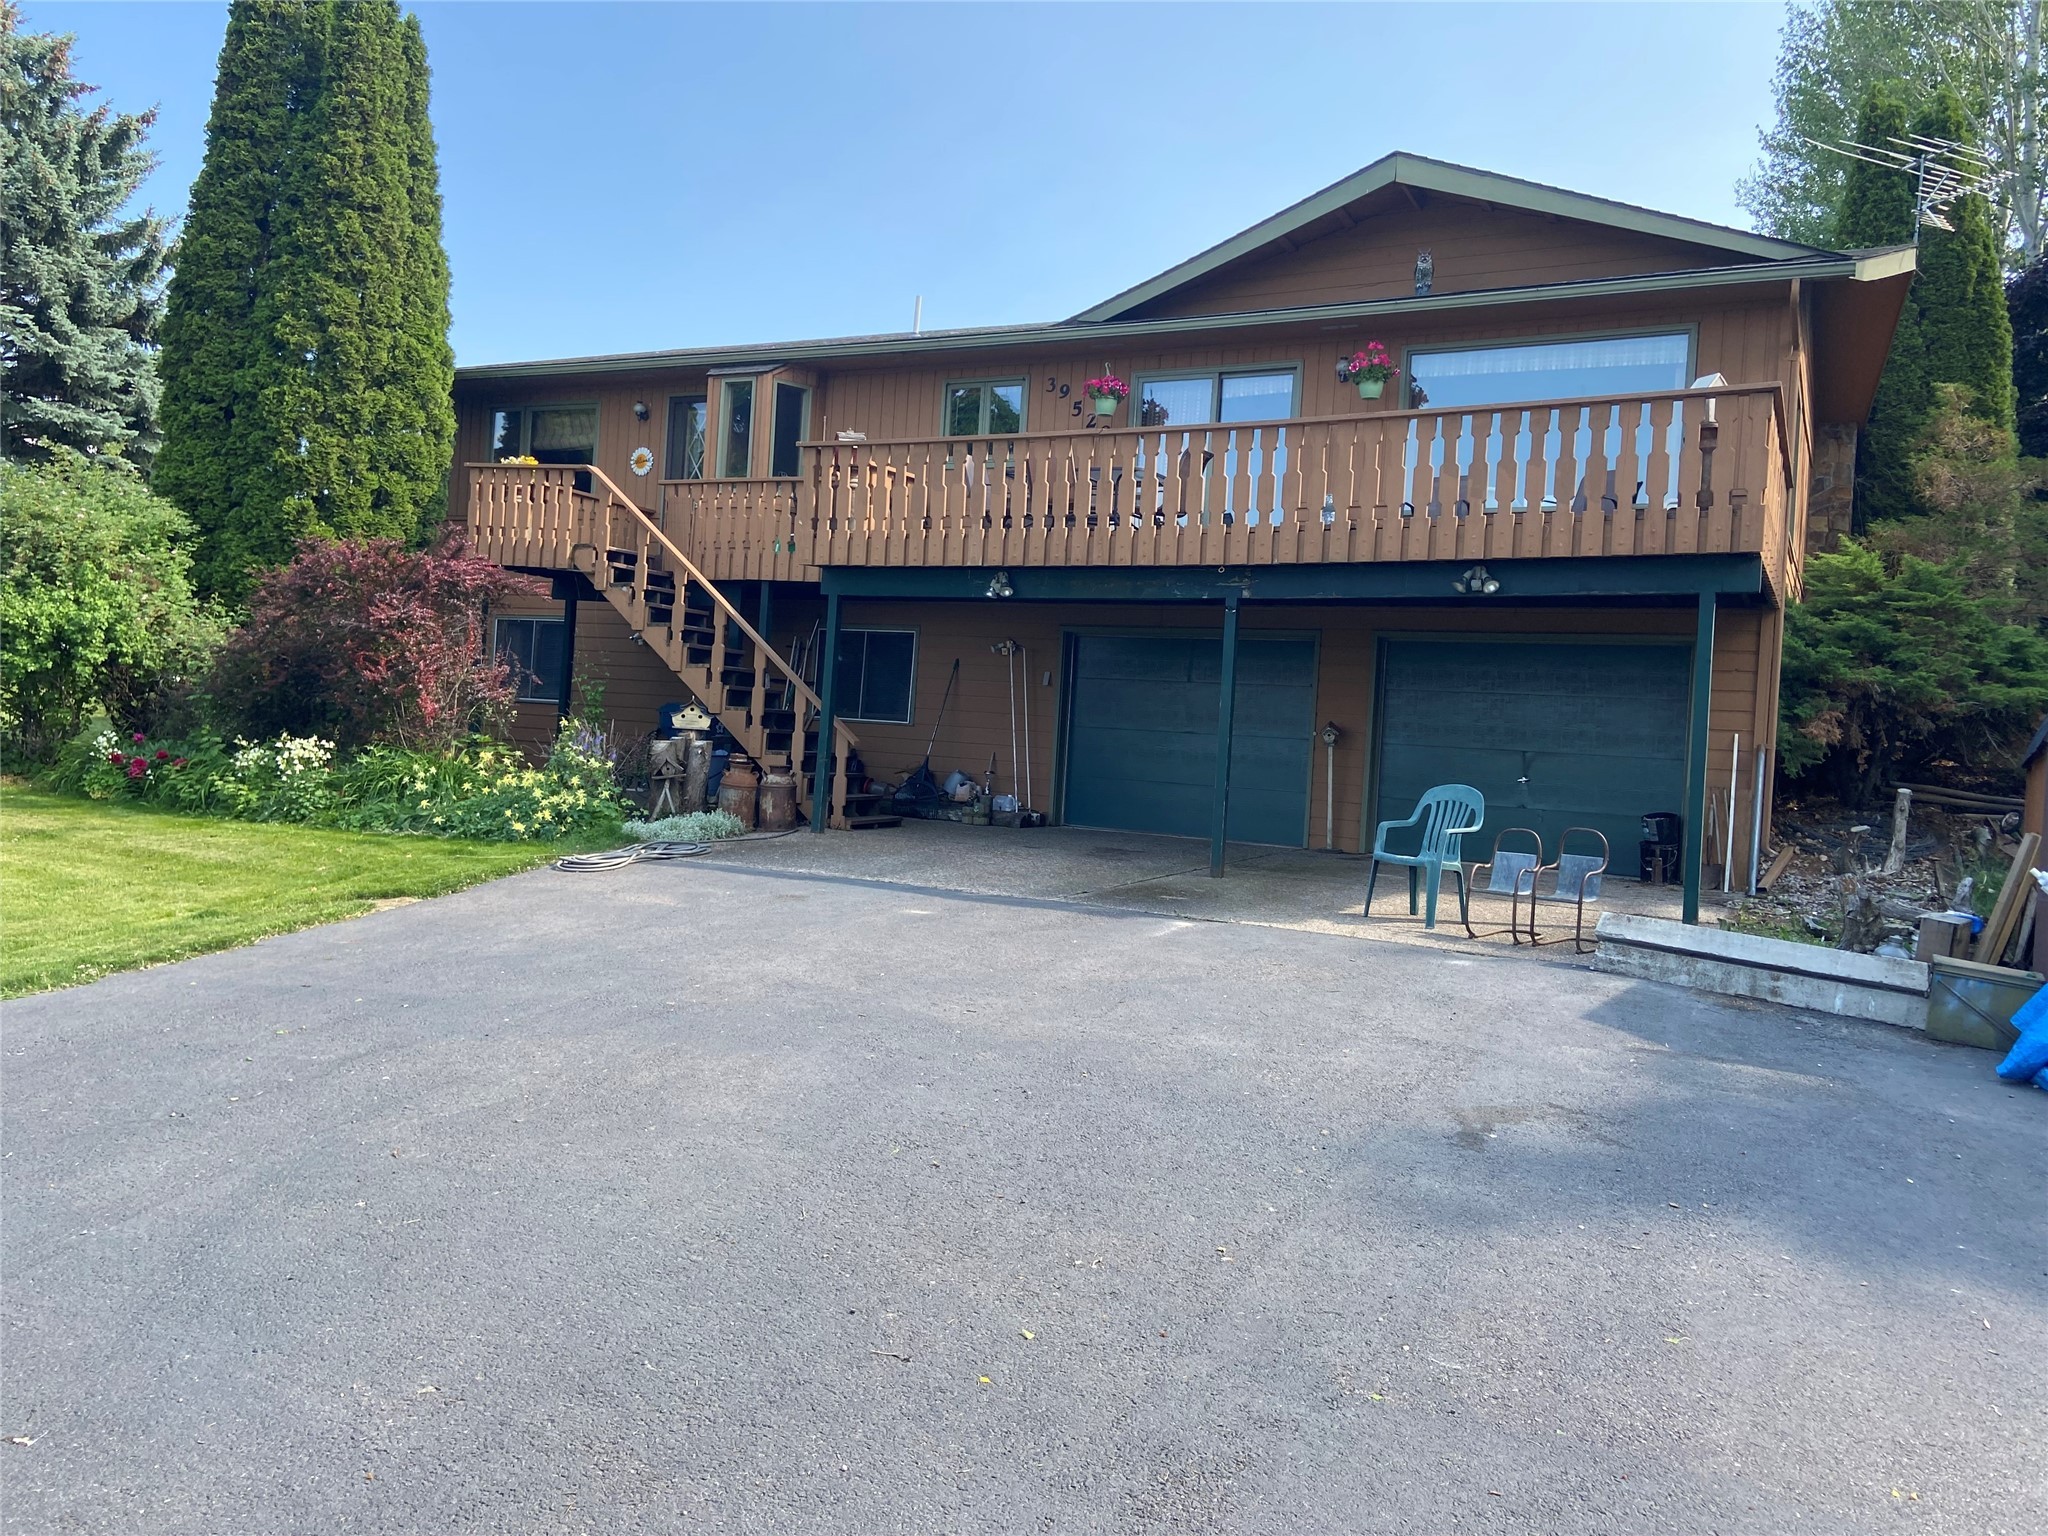 Priced Below Recent Appraisal. For a full price, acceptable offer, sellers will credit buyers $10,000 towards an interest rate buydown at closing. Beautiful Lake and Mountain Views, Private "end-of-the-road" location. 2,320 SF, 3 Bedroom, 3 Bath home with deep "Tuck-Under" garage. Main level Great Room, dining area with warm golden wood, "tongue and groove" walls and raised ceiling.  Magnificent views. A balcony deck expands warm weather outdoor living. U-shaped kitchen has newer appliances; refrigerator, oven/range with all the latest features and dishwasher. Ample counter space and cabinets. Master suite includes 3/4 bath and laundry area. Second bedroom and full bath. Drive wraps around to entrance in back for easy access to main level.
Lower level has outside entrance, full kitchen, 3rd bedroom with built-ins, Full bath with "Jetted-Tub" and 
attached  sauna. Family room/den has wood stove and the shelving unit will remain. Garage has propane stove.
Shared Well. 2 Parties. Orchard has apricots, apples, pears, cherries and plums. Fenced in garden area. Storage unit garden shed in back  Barn shaped storage shed in front on right side will remain. Yard is surrounded in back by evergreens and deciduous trees and shrubs.  Many perennials throughout property and many mature trees in front and side of property.  underground sprinklers. Oversized "Tuck-Under" garage has storage area and fruit room.